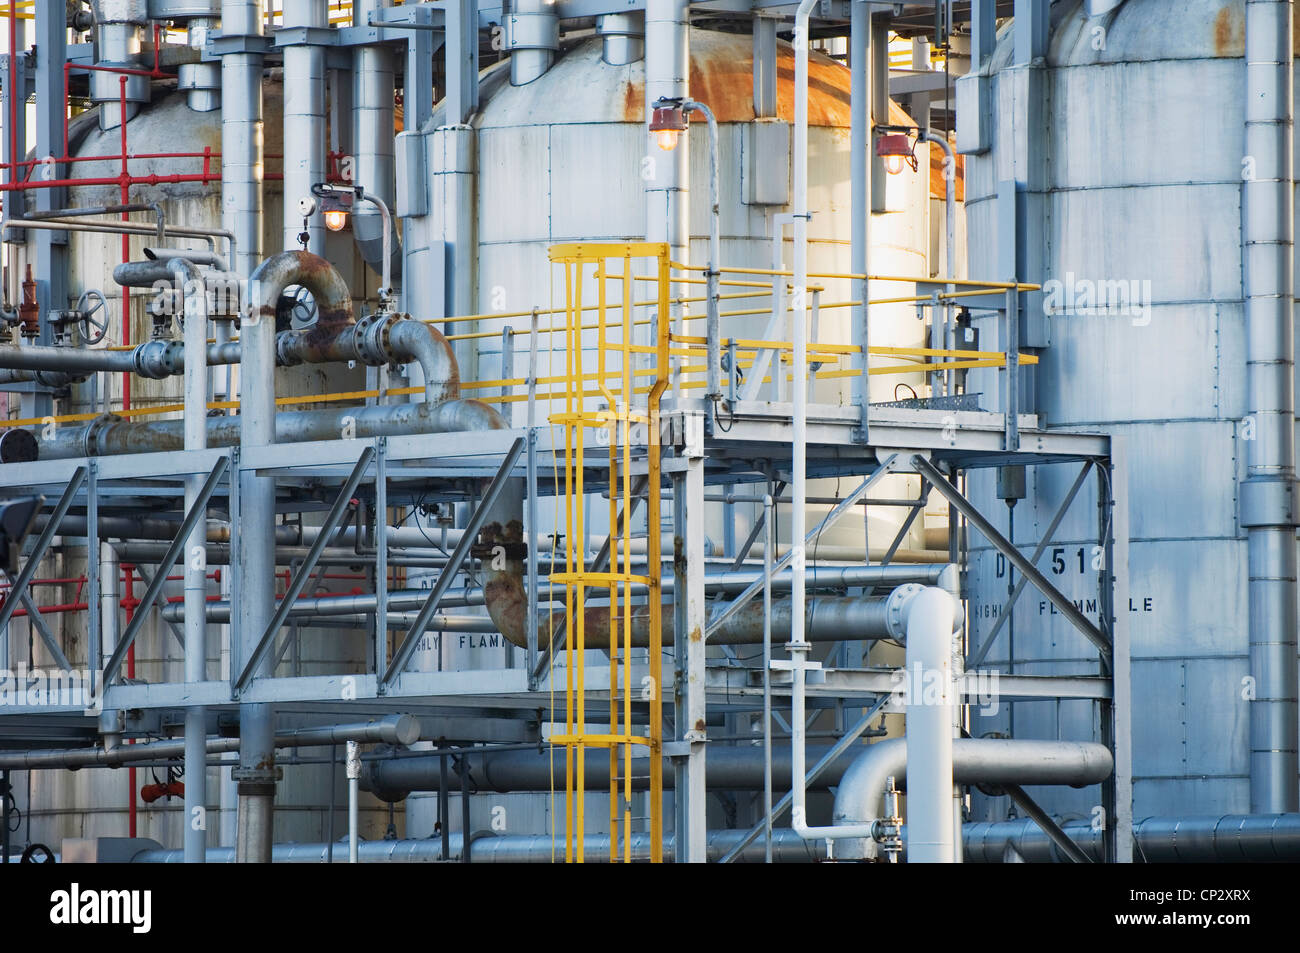 Detail of pipes and tanks at oil refinery, Grangemouth, Scotland. Stock Photo